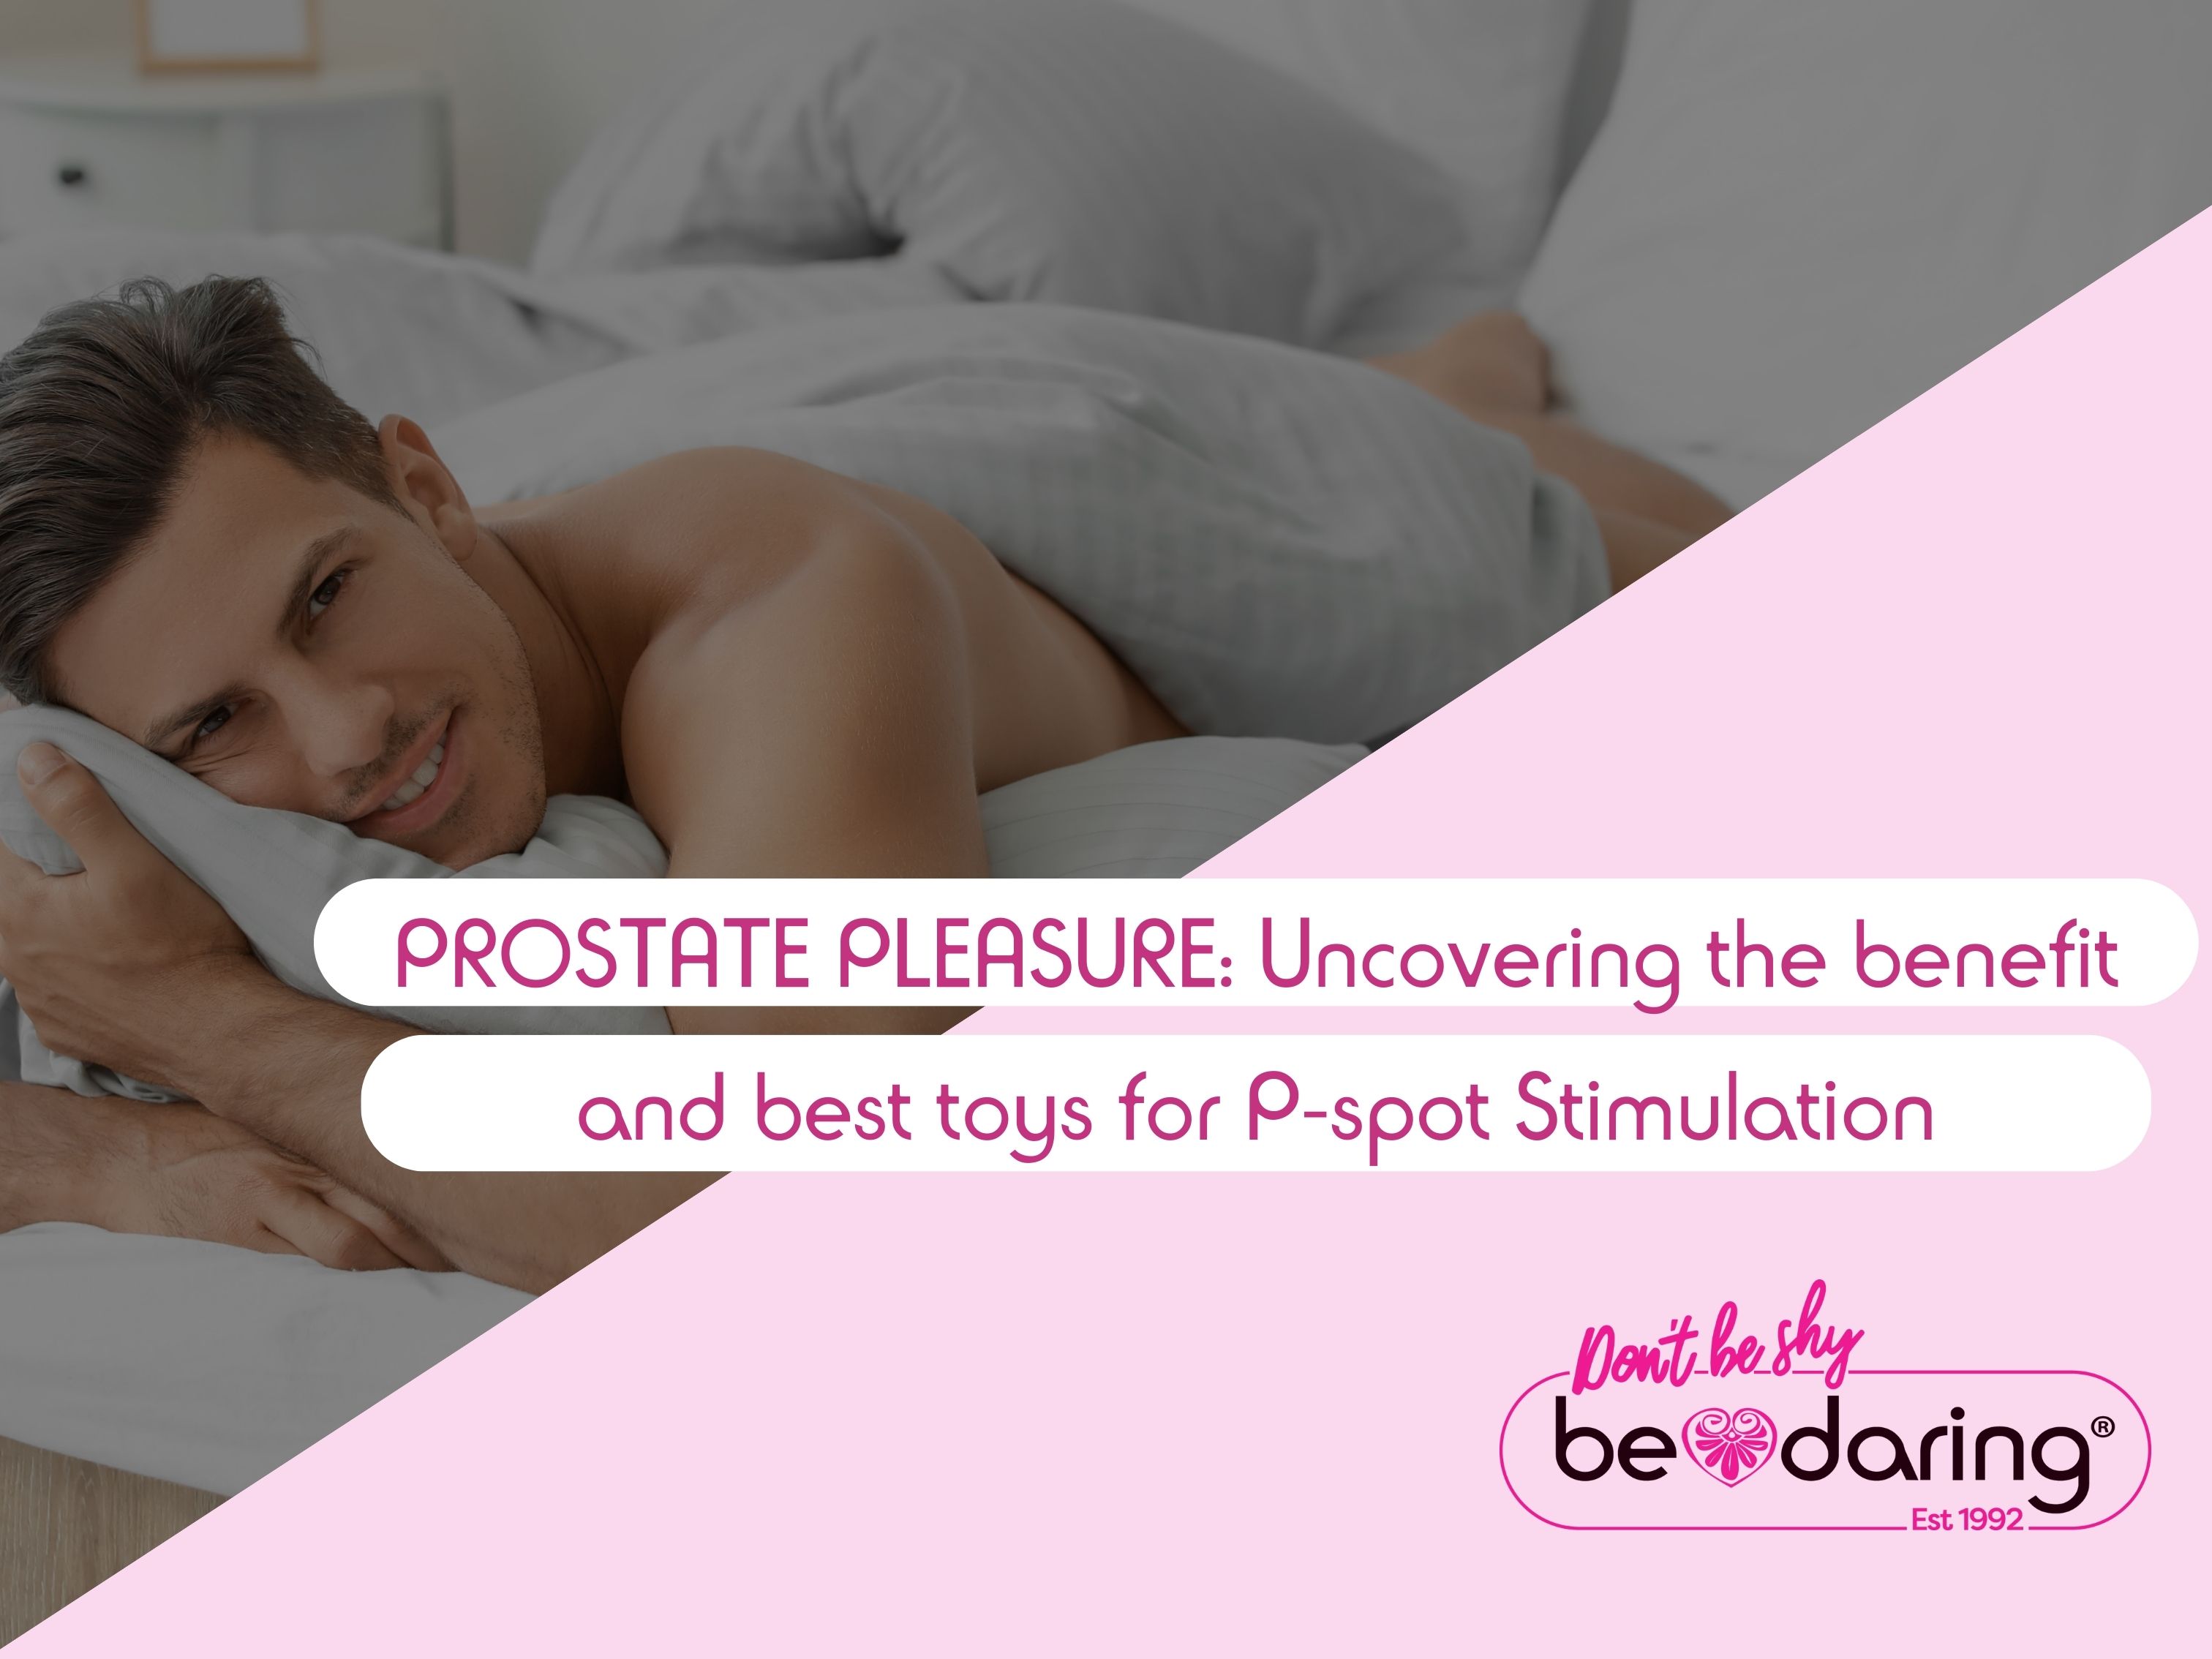 PROSTATE PLEASURE: Benefits and Best toys for P-spot stimulation 